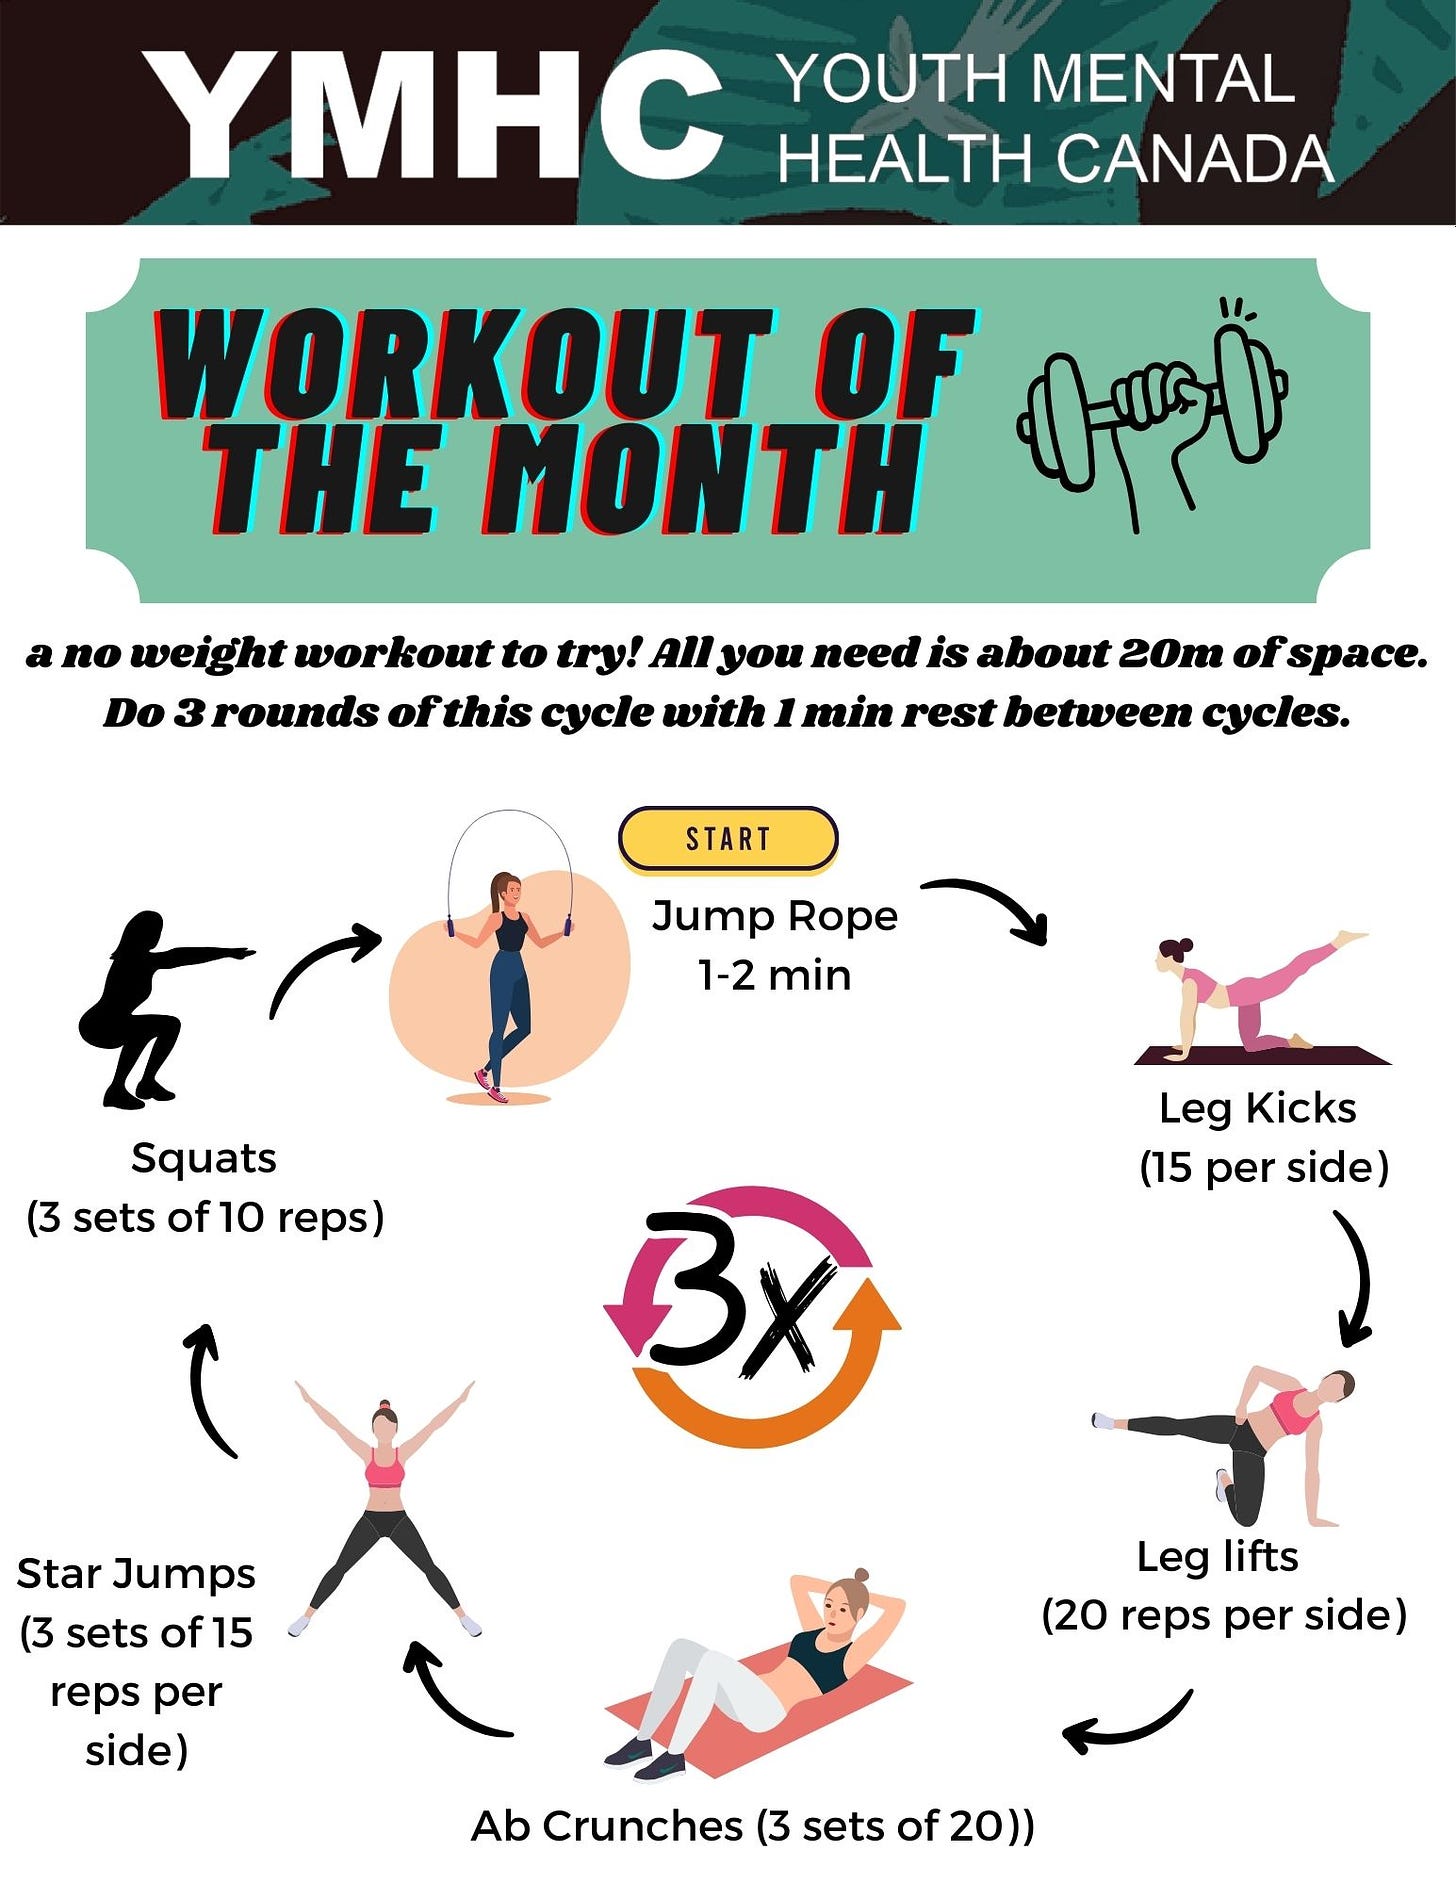 Workout of the Month Here's a no-weight workout for you to try! All you need is about 20m of space. Do 3 rounds of this cycle with 1 min rest between cycles.  Jump Rope: 1-2 min Leg Kicks: 15 per side Leg Lifts: 20 reps per side Ab Crunches: 3 sets of 20 Star Jumps: 3 sets of 15 reps per side Squats: 3 sets of 10 reps